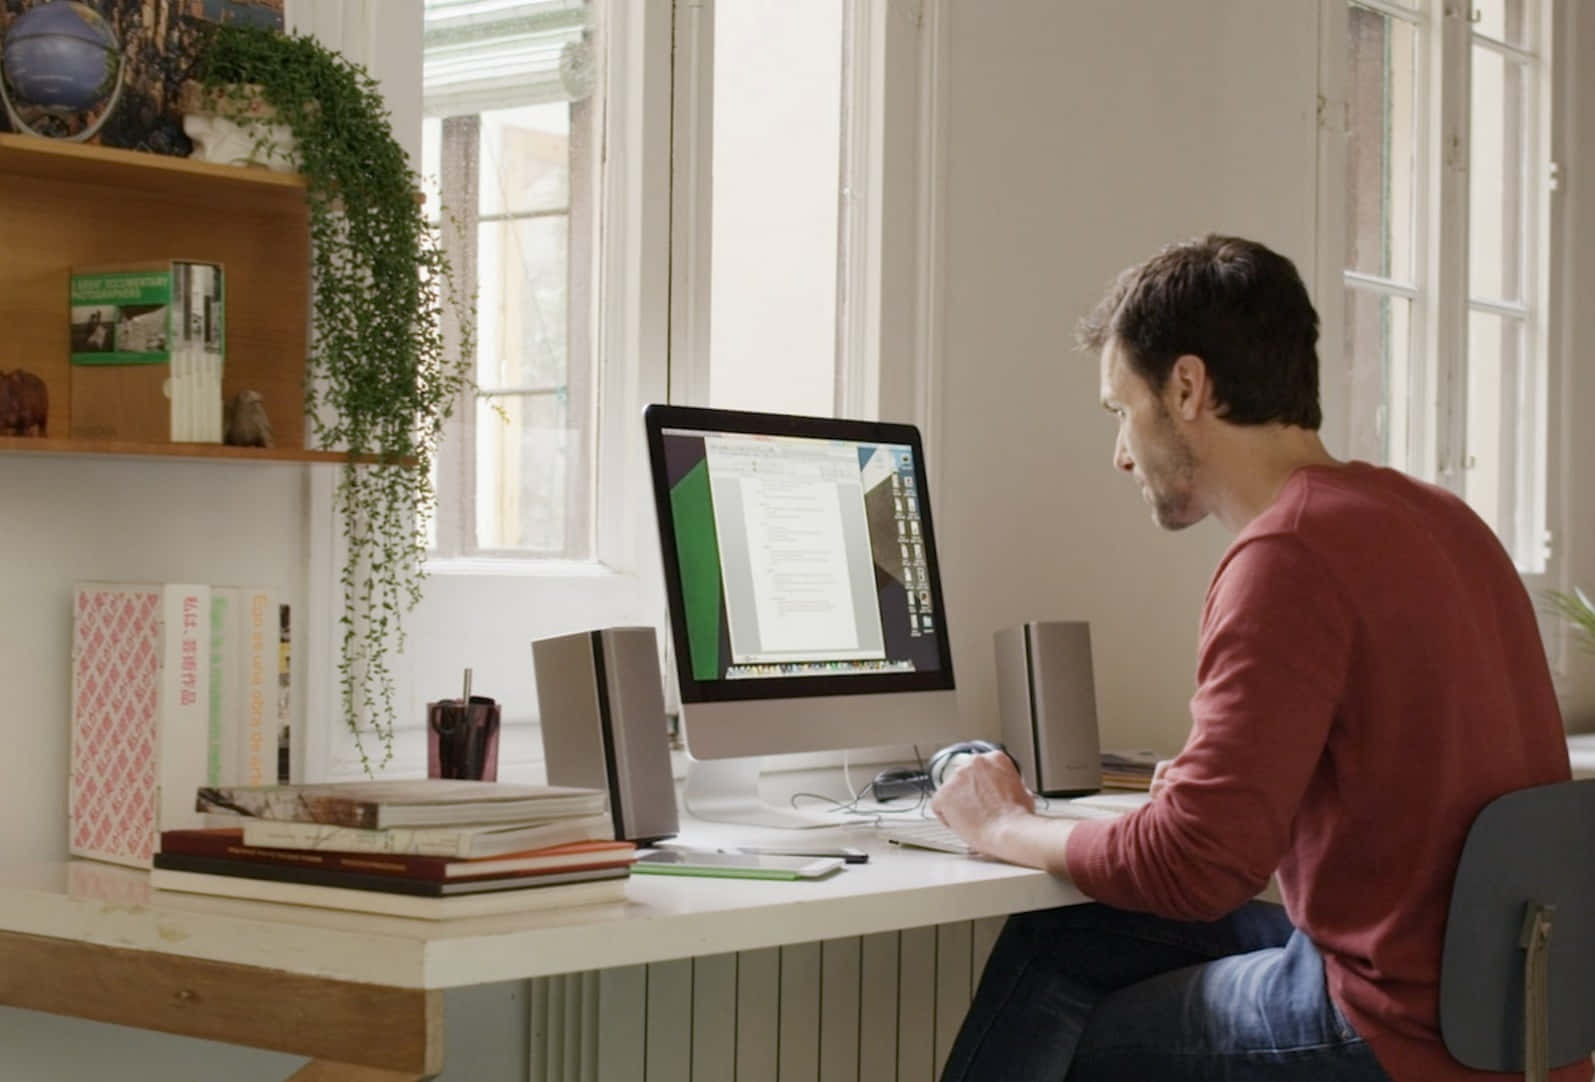 A Man Is Sitting At A Desk With A Laptop And A Plant